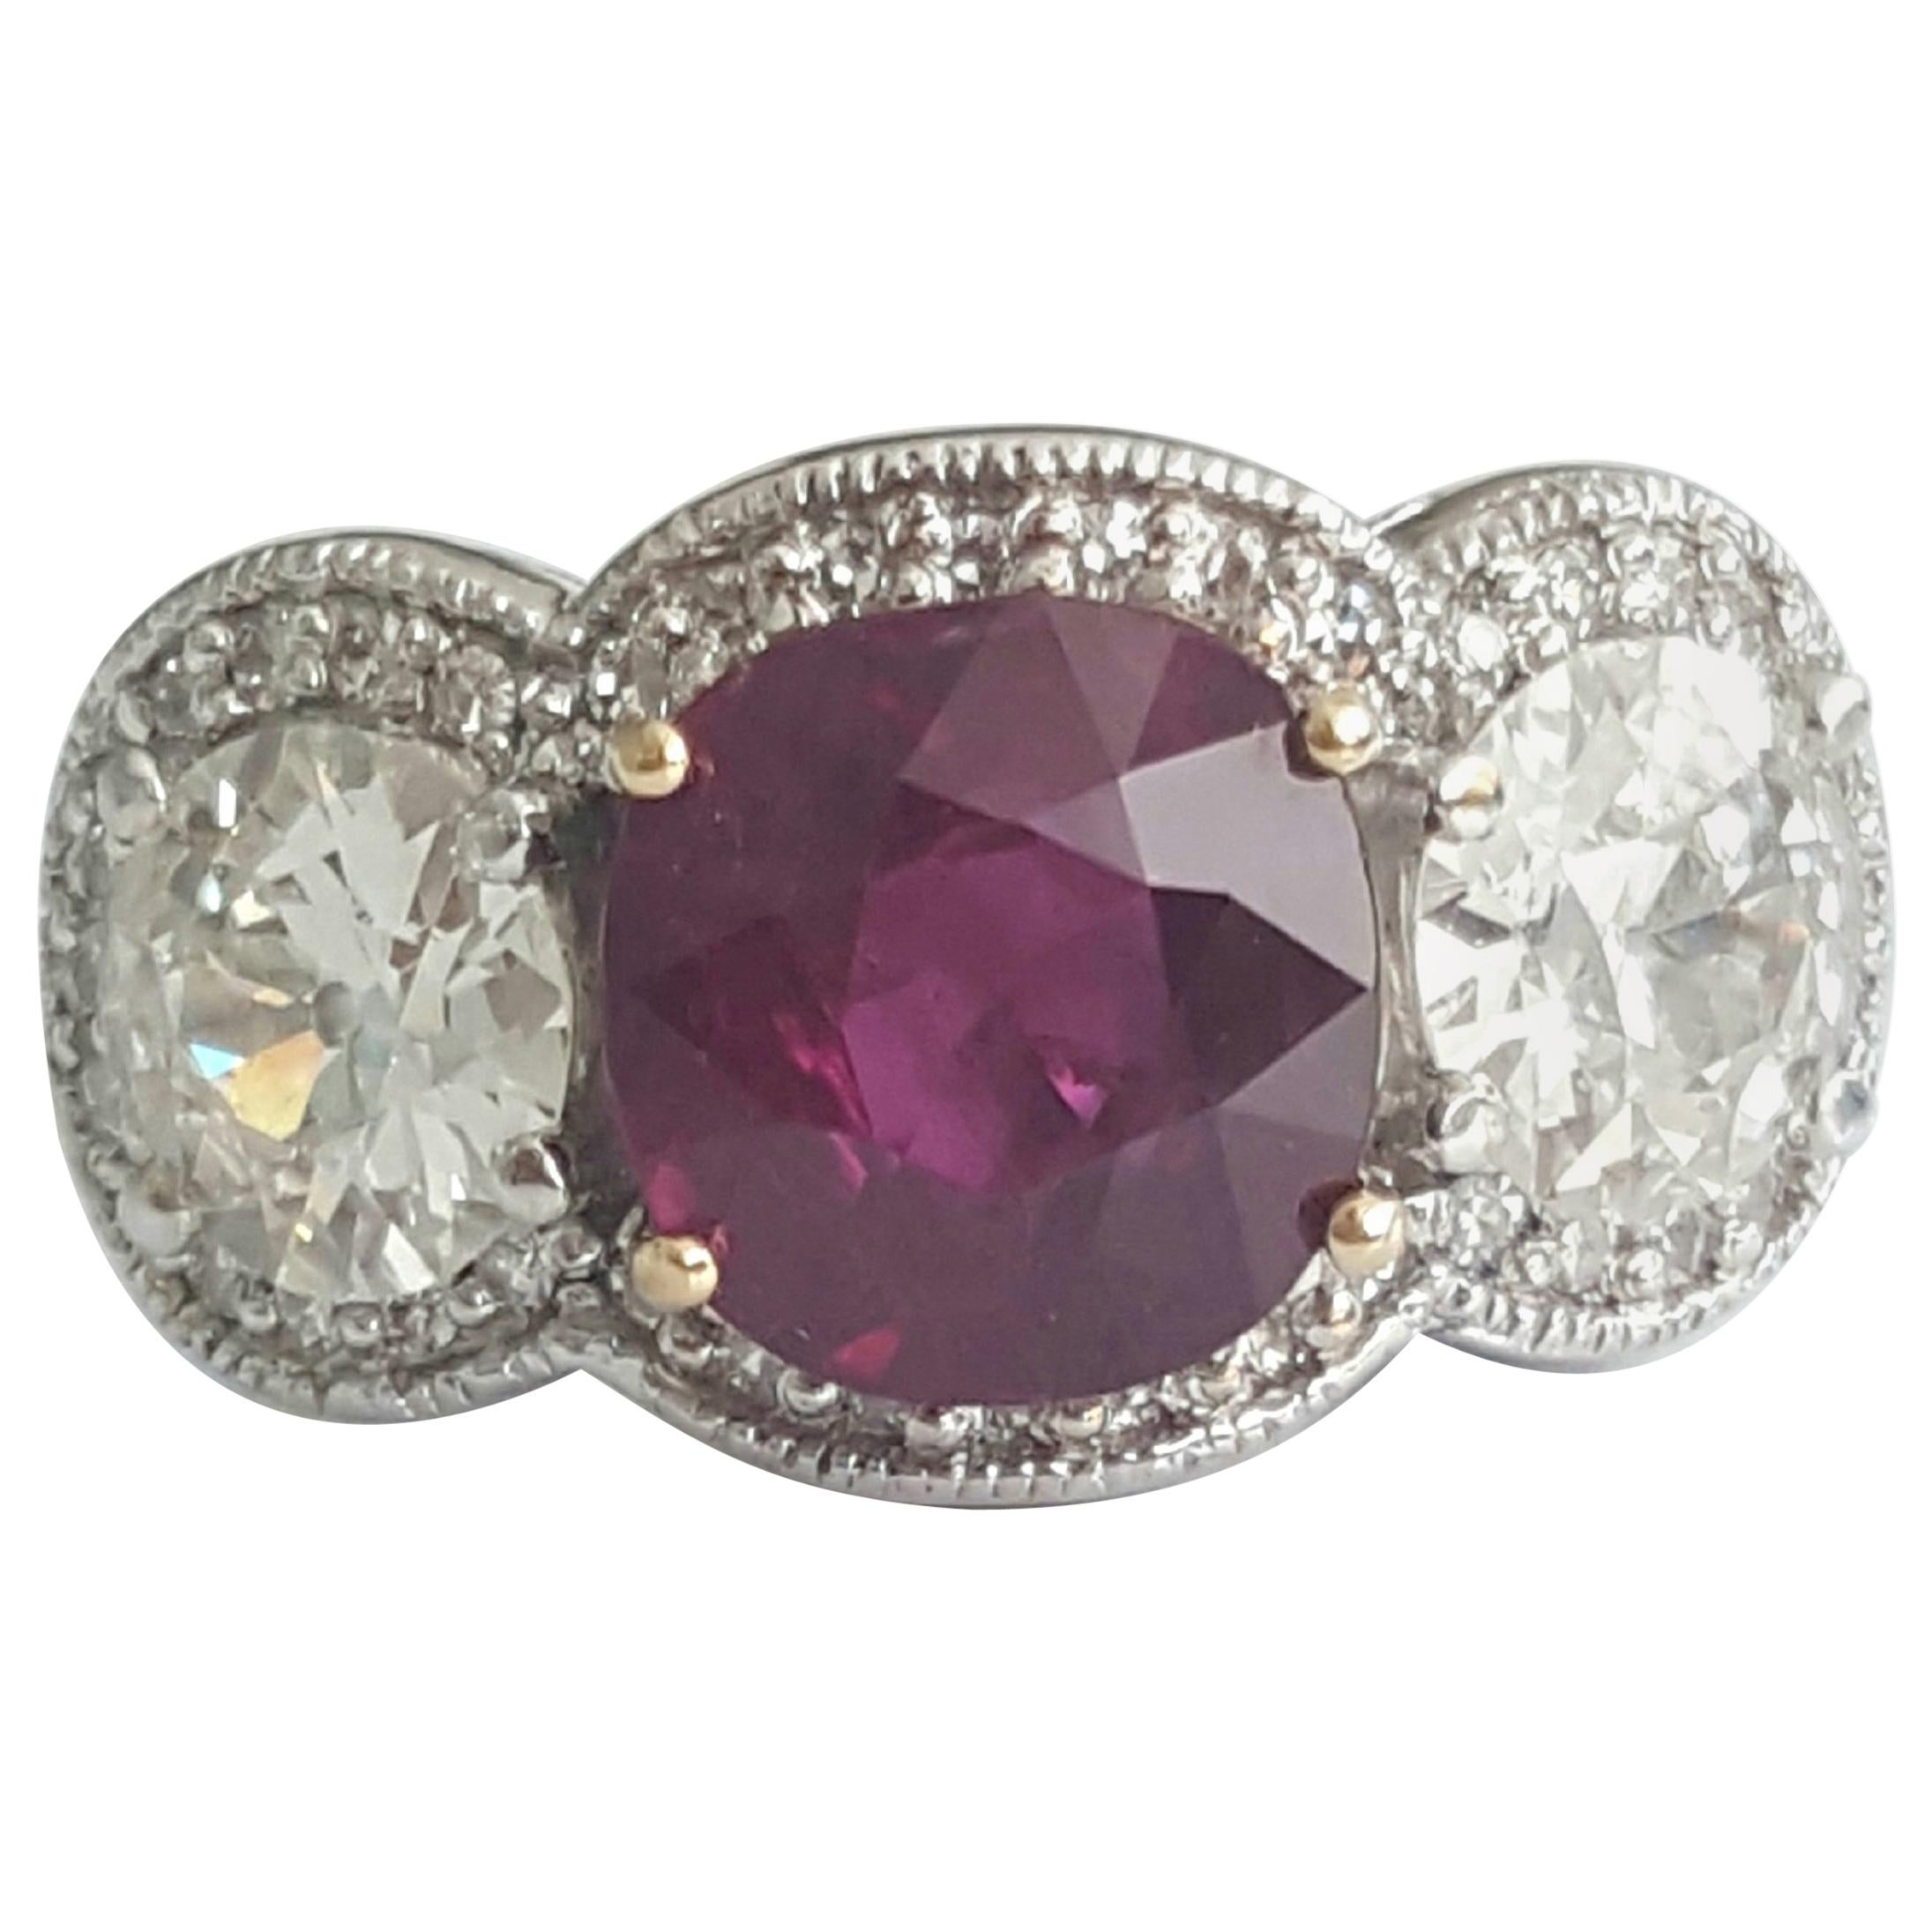 5.03 Carat Natural Cushion Ruby And White Round Old Cut Diamond Ring In 18K. For Sale